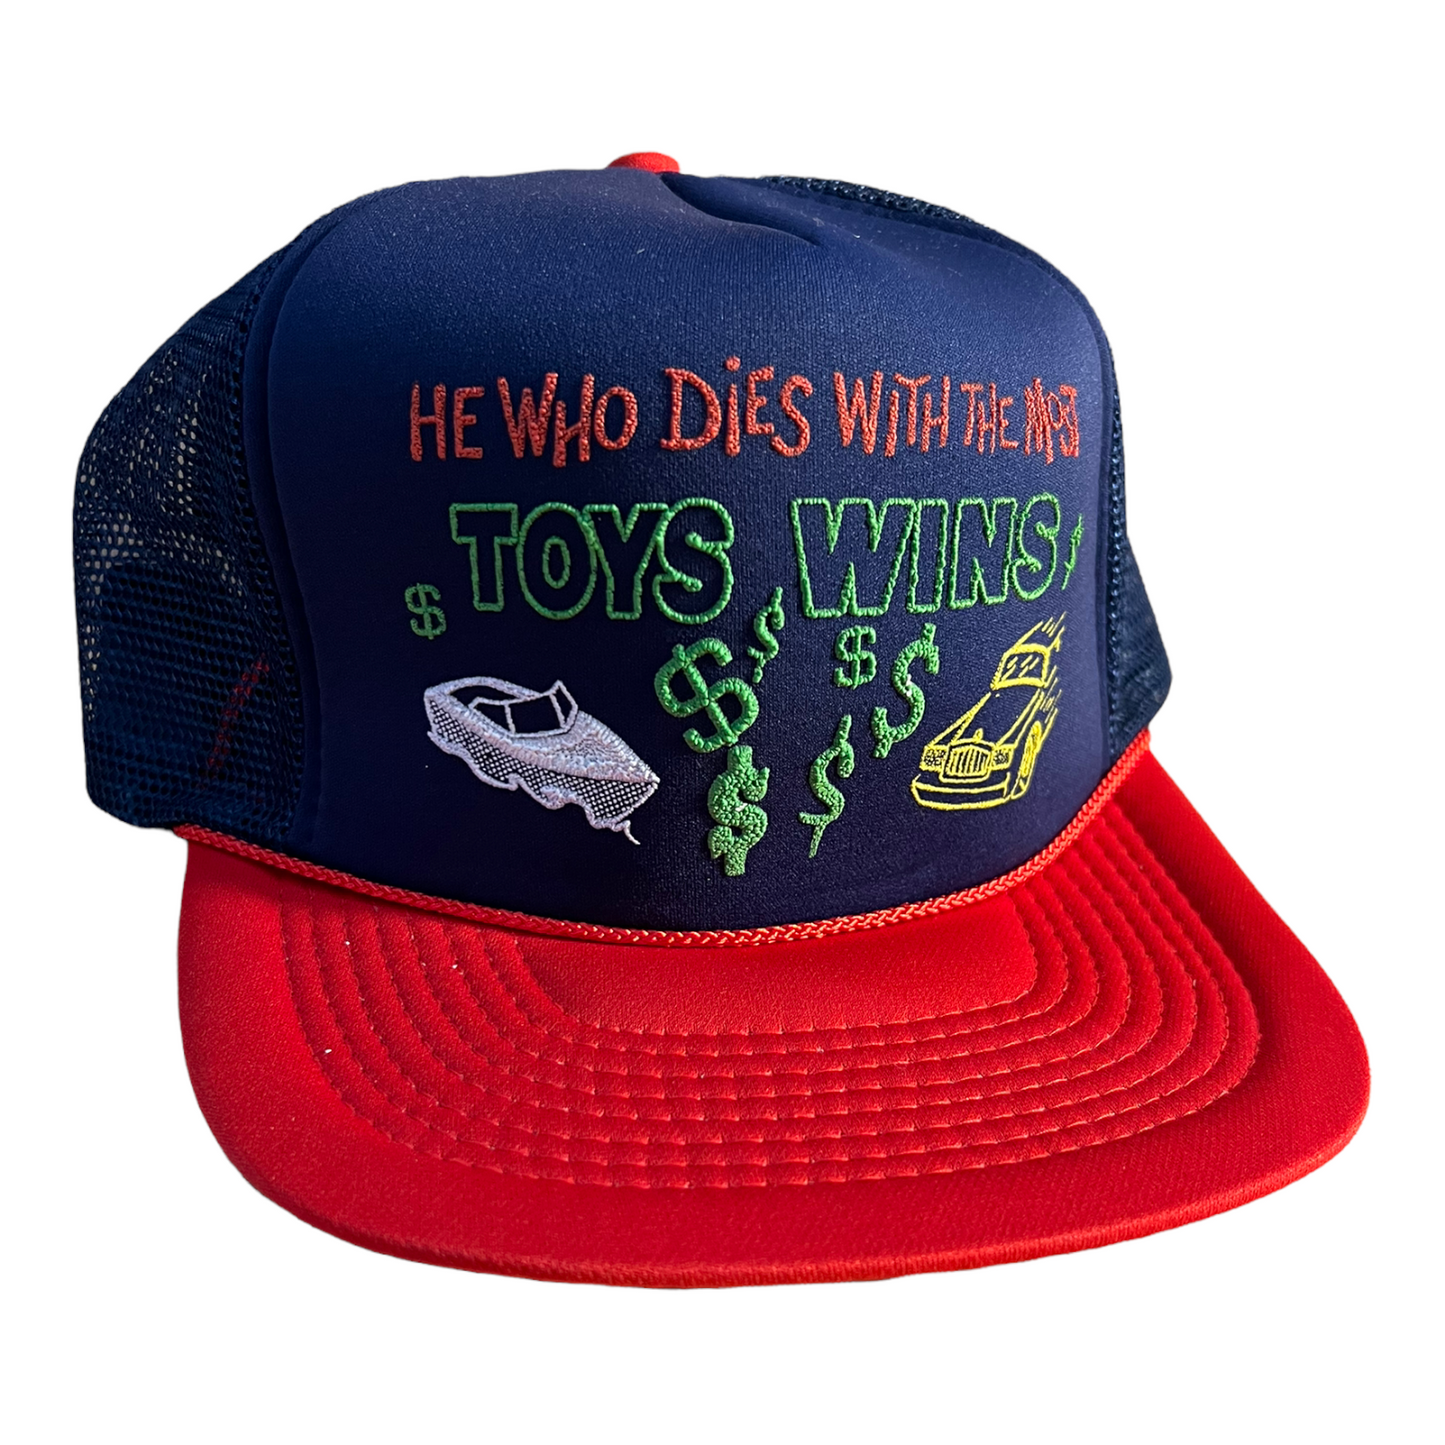 Vintage He Who Dies With The Most Toys Wins Trucker Hat Funny Hat